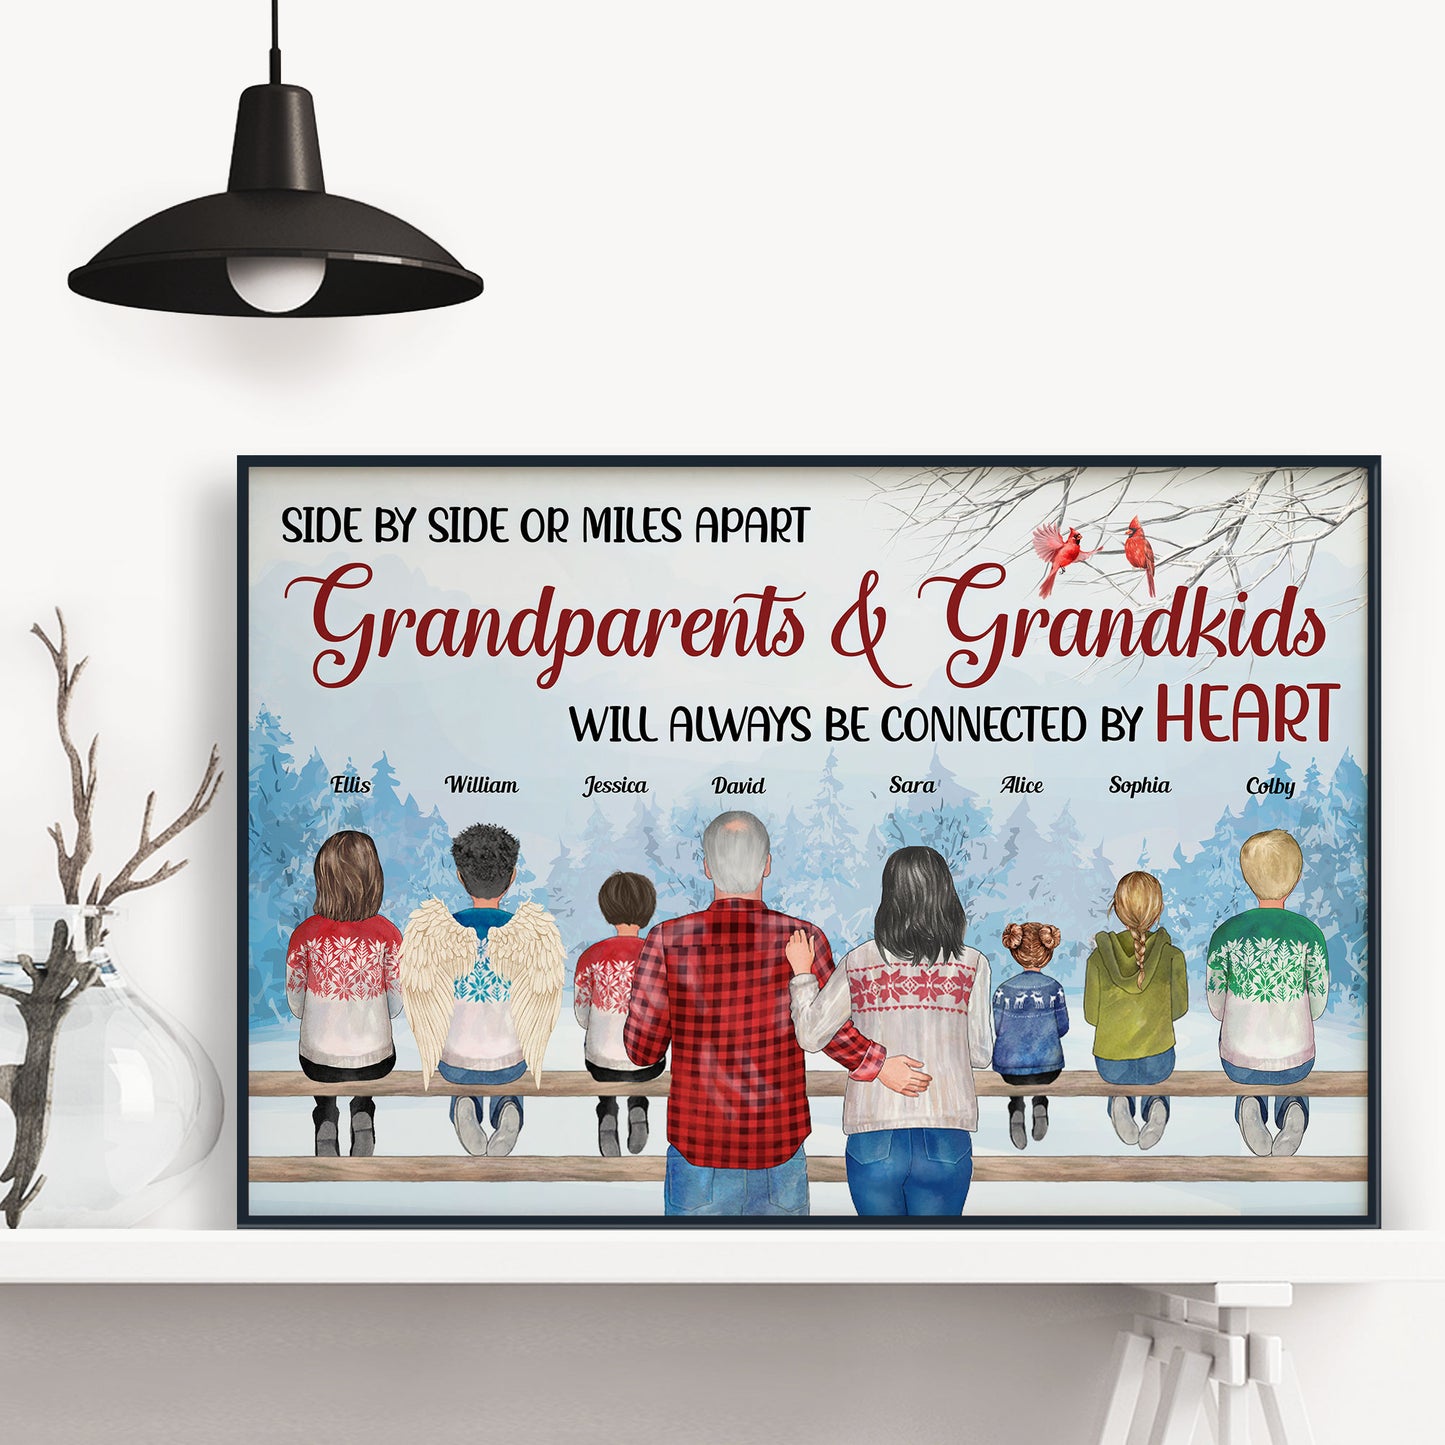 The Love Between Grandparents & Grandkids Knows No Distance - Personalized Poster - Christmas, Loving Gift For Parents, Mom & Dad, Grandparents, Grandkids